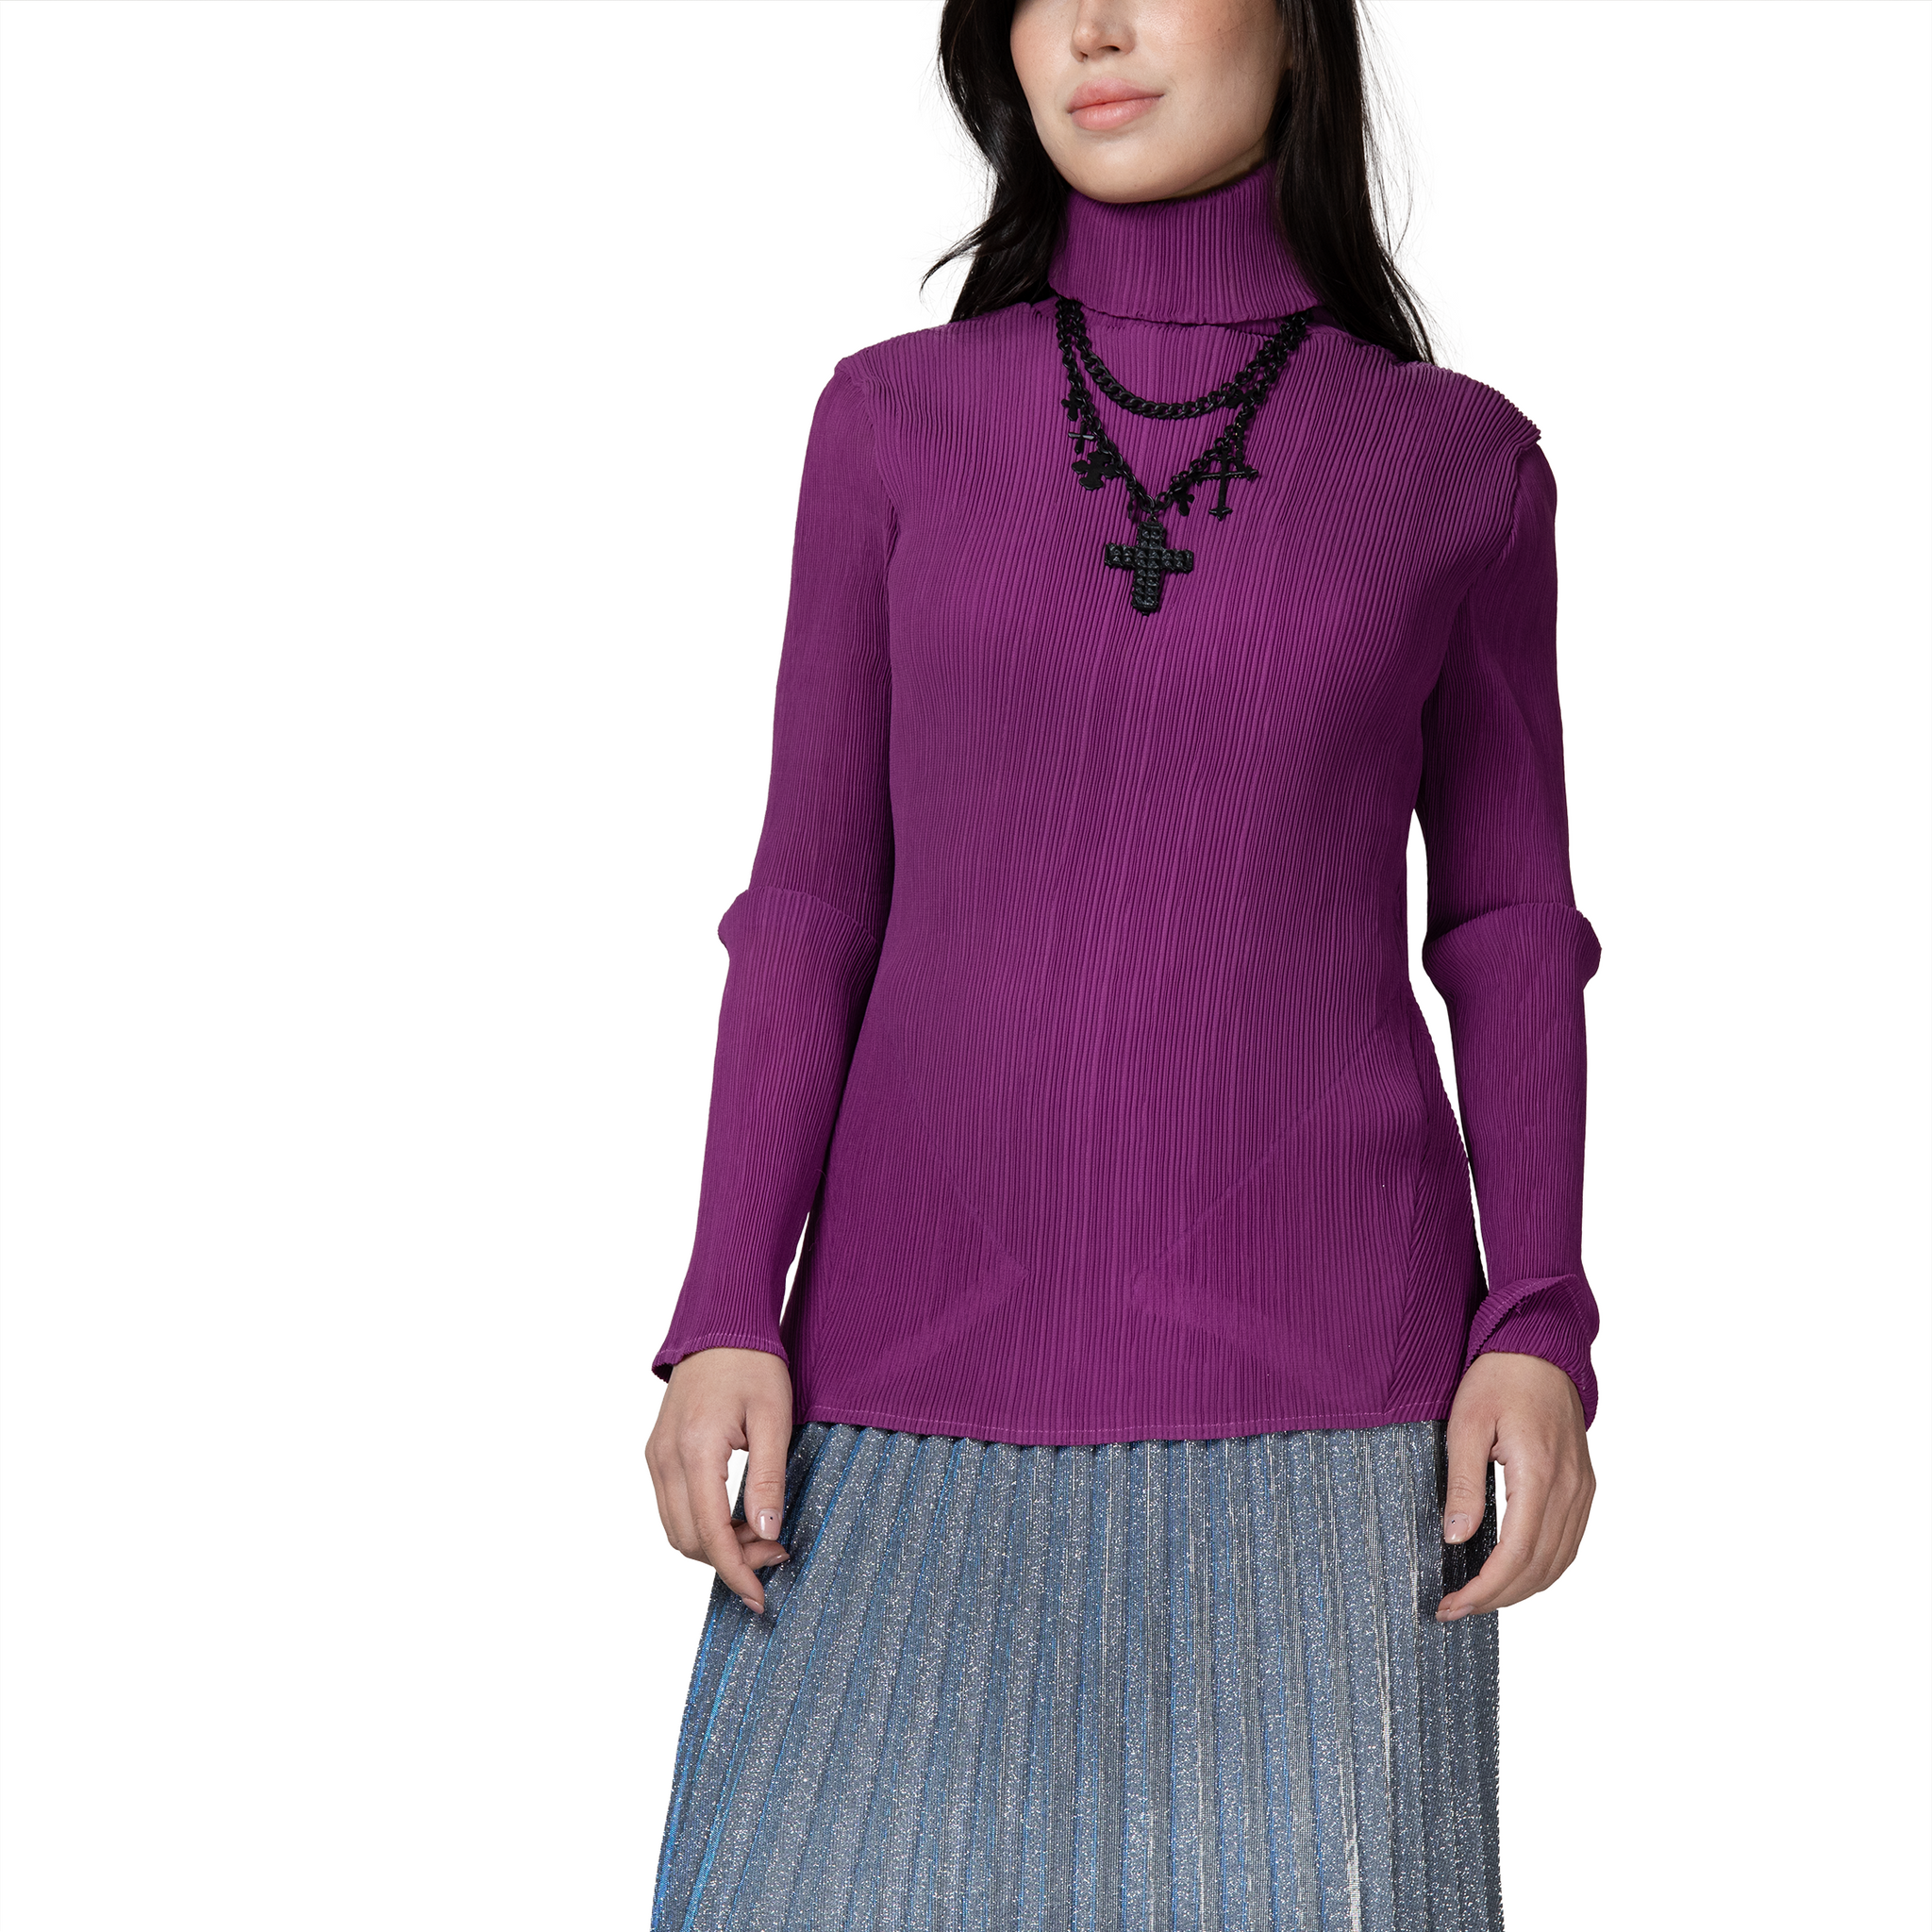 Pleated hight-neck top